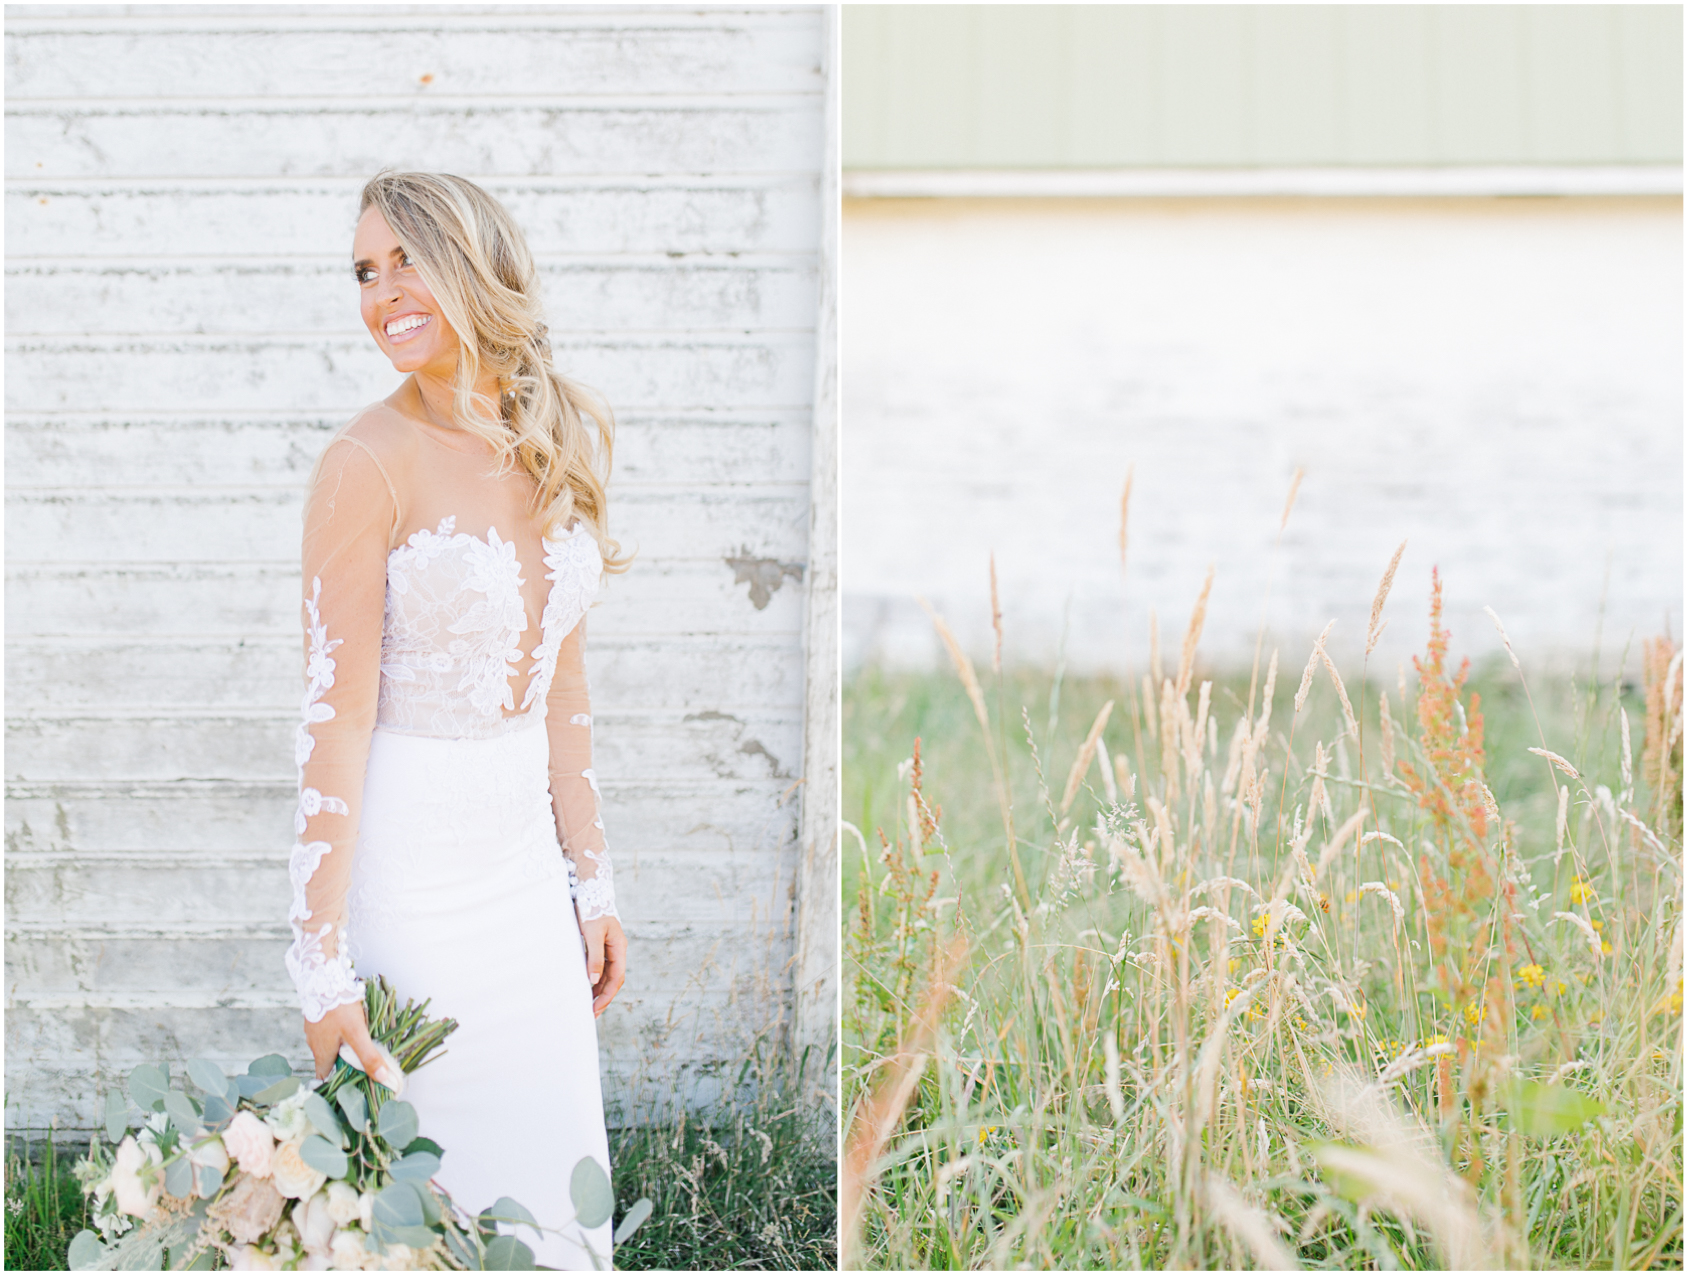 Dream Chasers Workshop on Rose Ranch | Emma Rose Company Education | Styled Shoot on a Ranch | Cattle Ranch Wedding | Rose Ranch Washington Wedding | Dream Chasers with Cameras | Styled Shoot | Stunning Bride.jpg